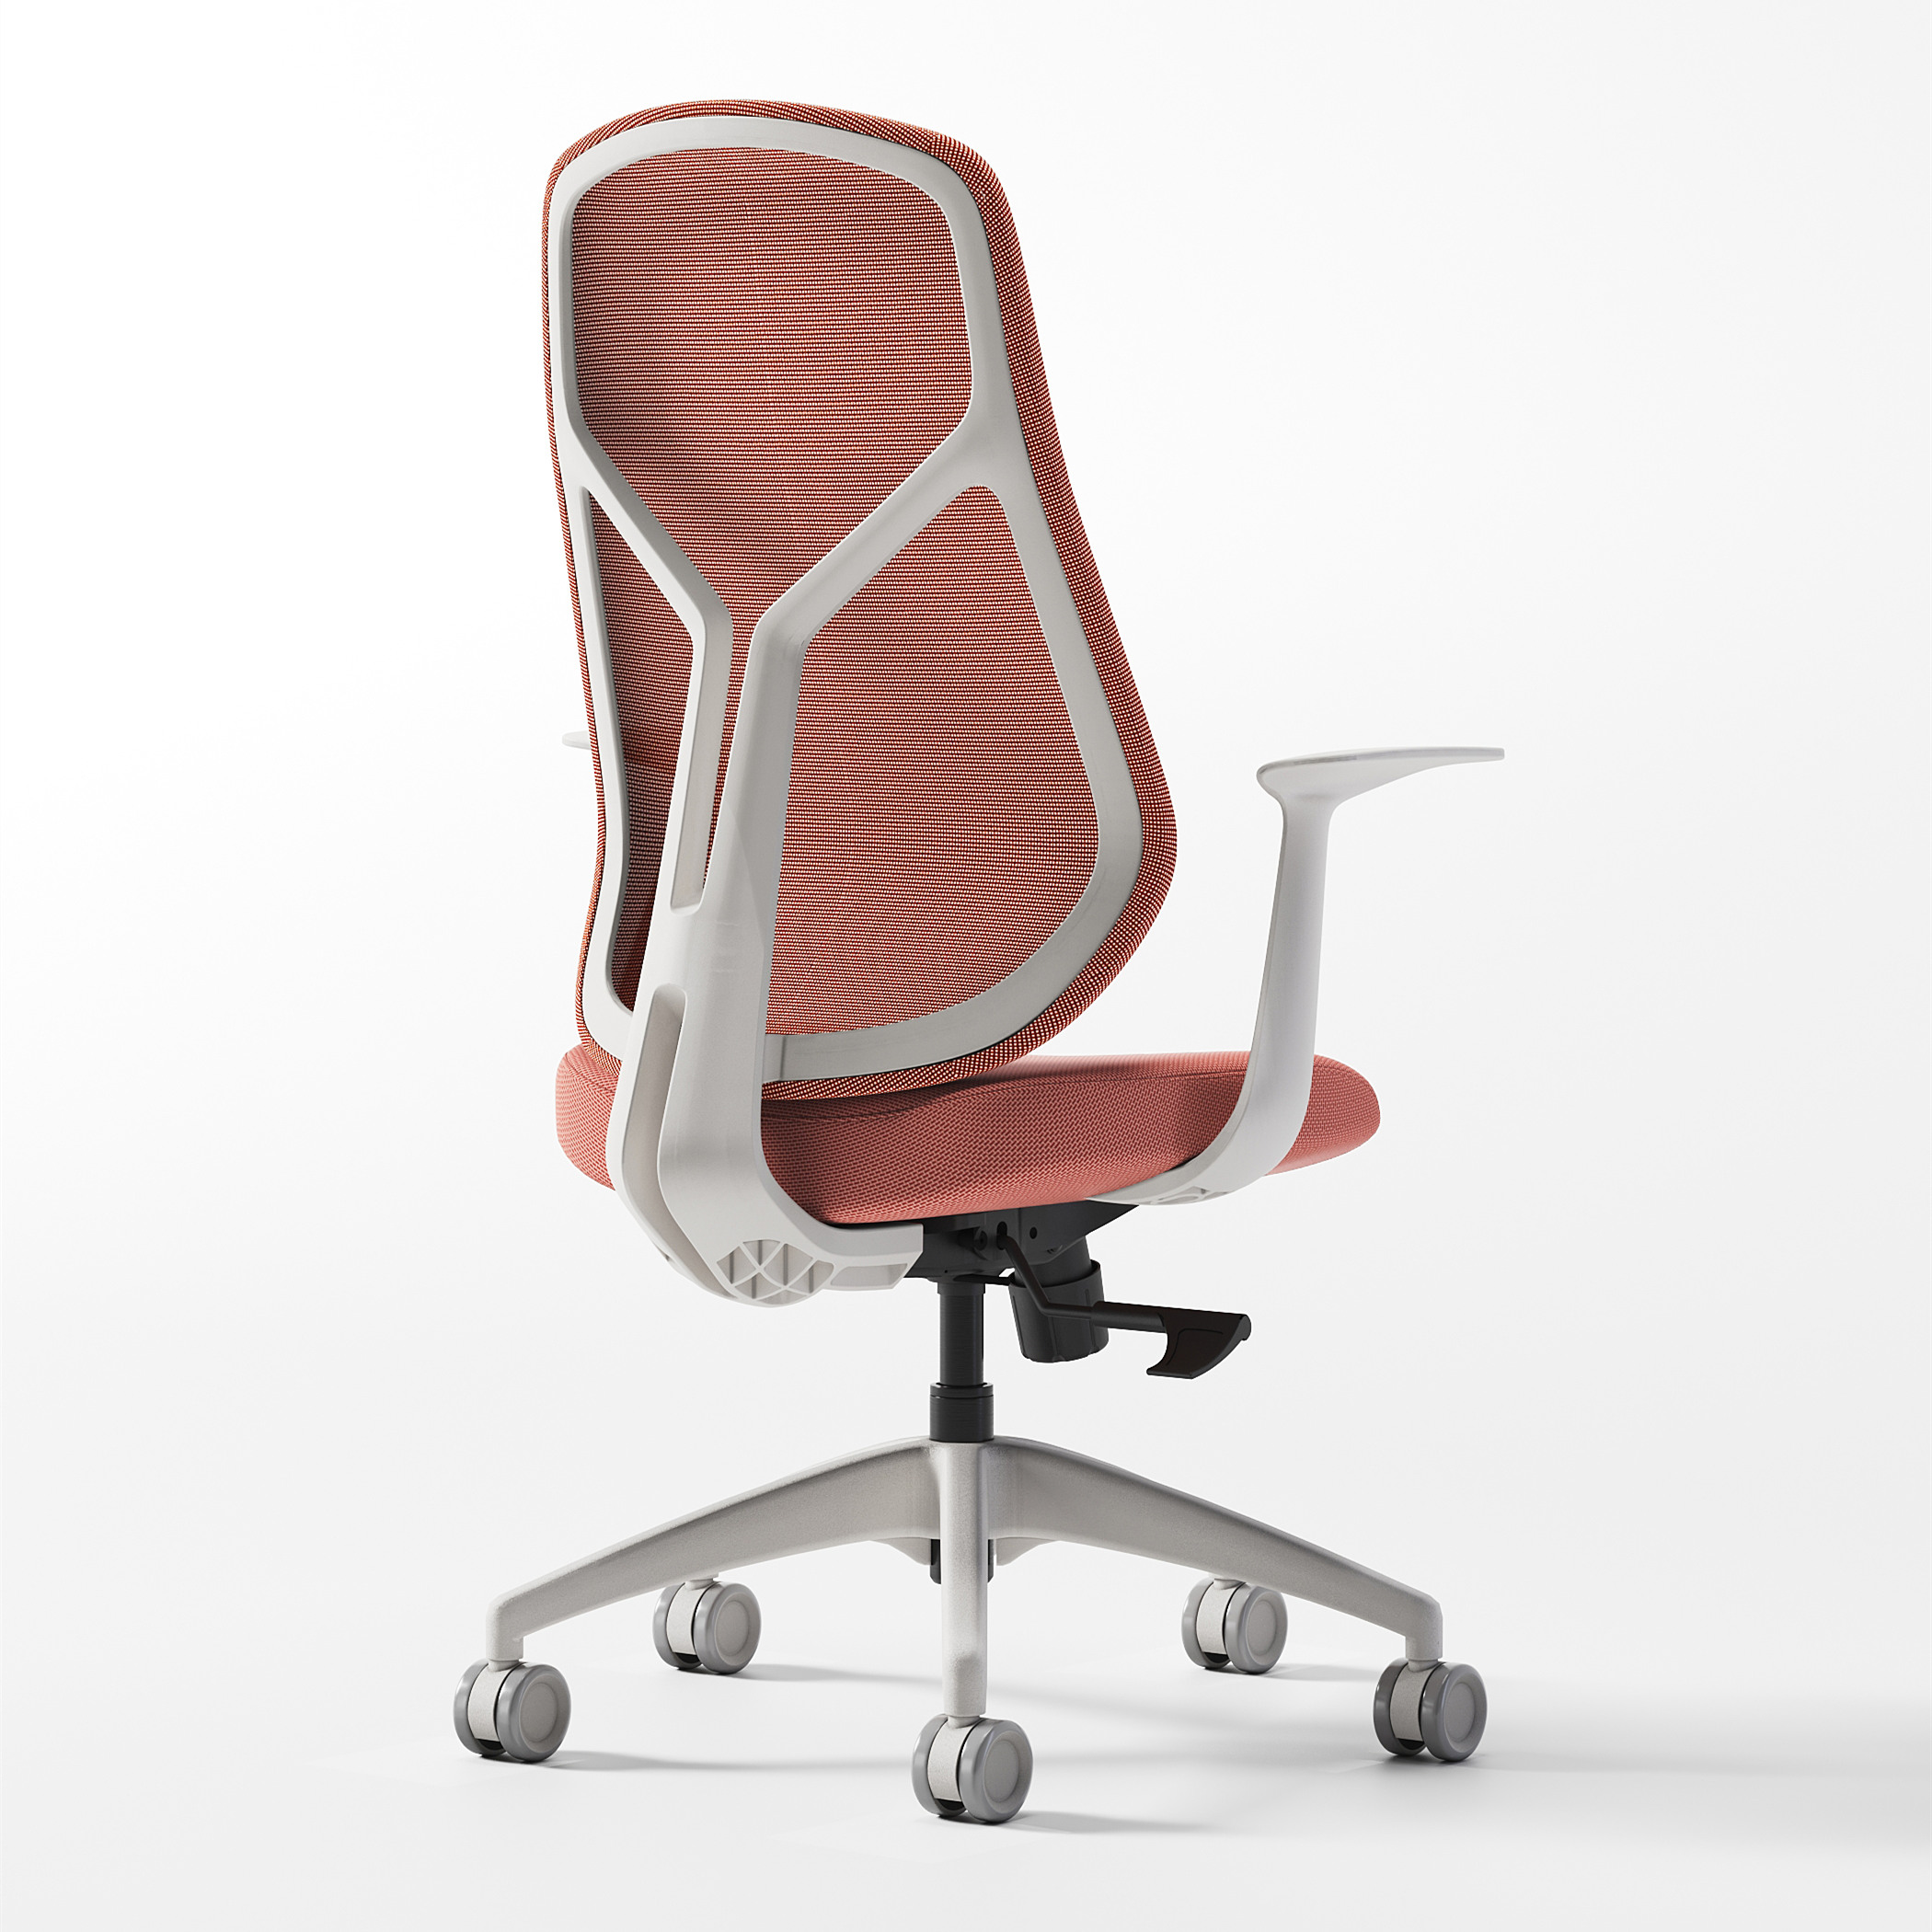 ZUOWE Office Chair for Home Office with Adjustable Armrest